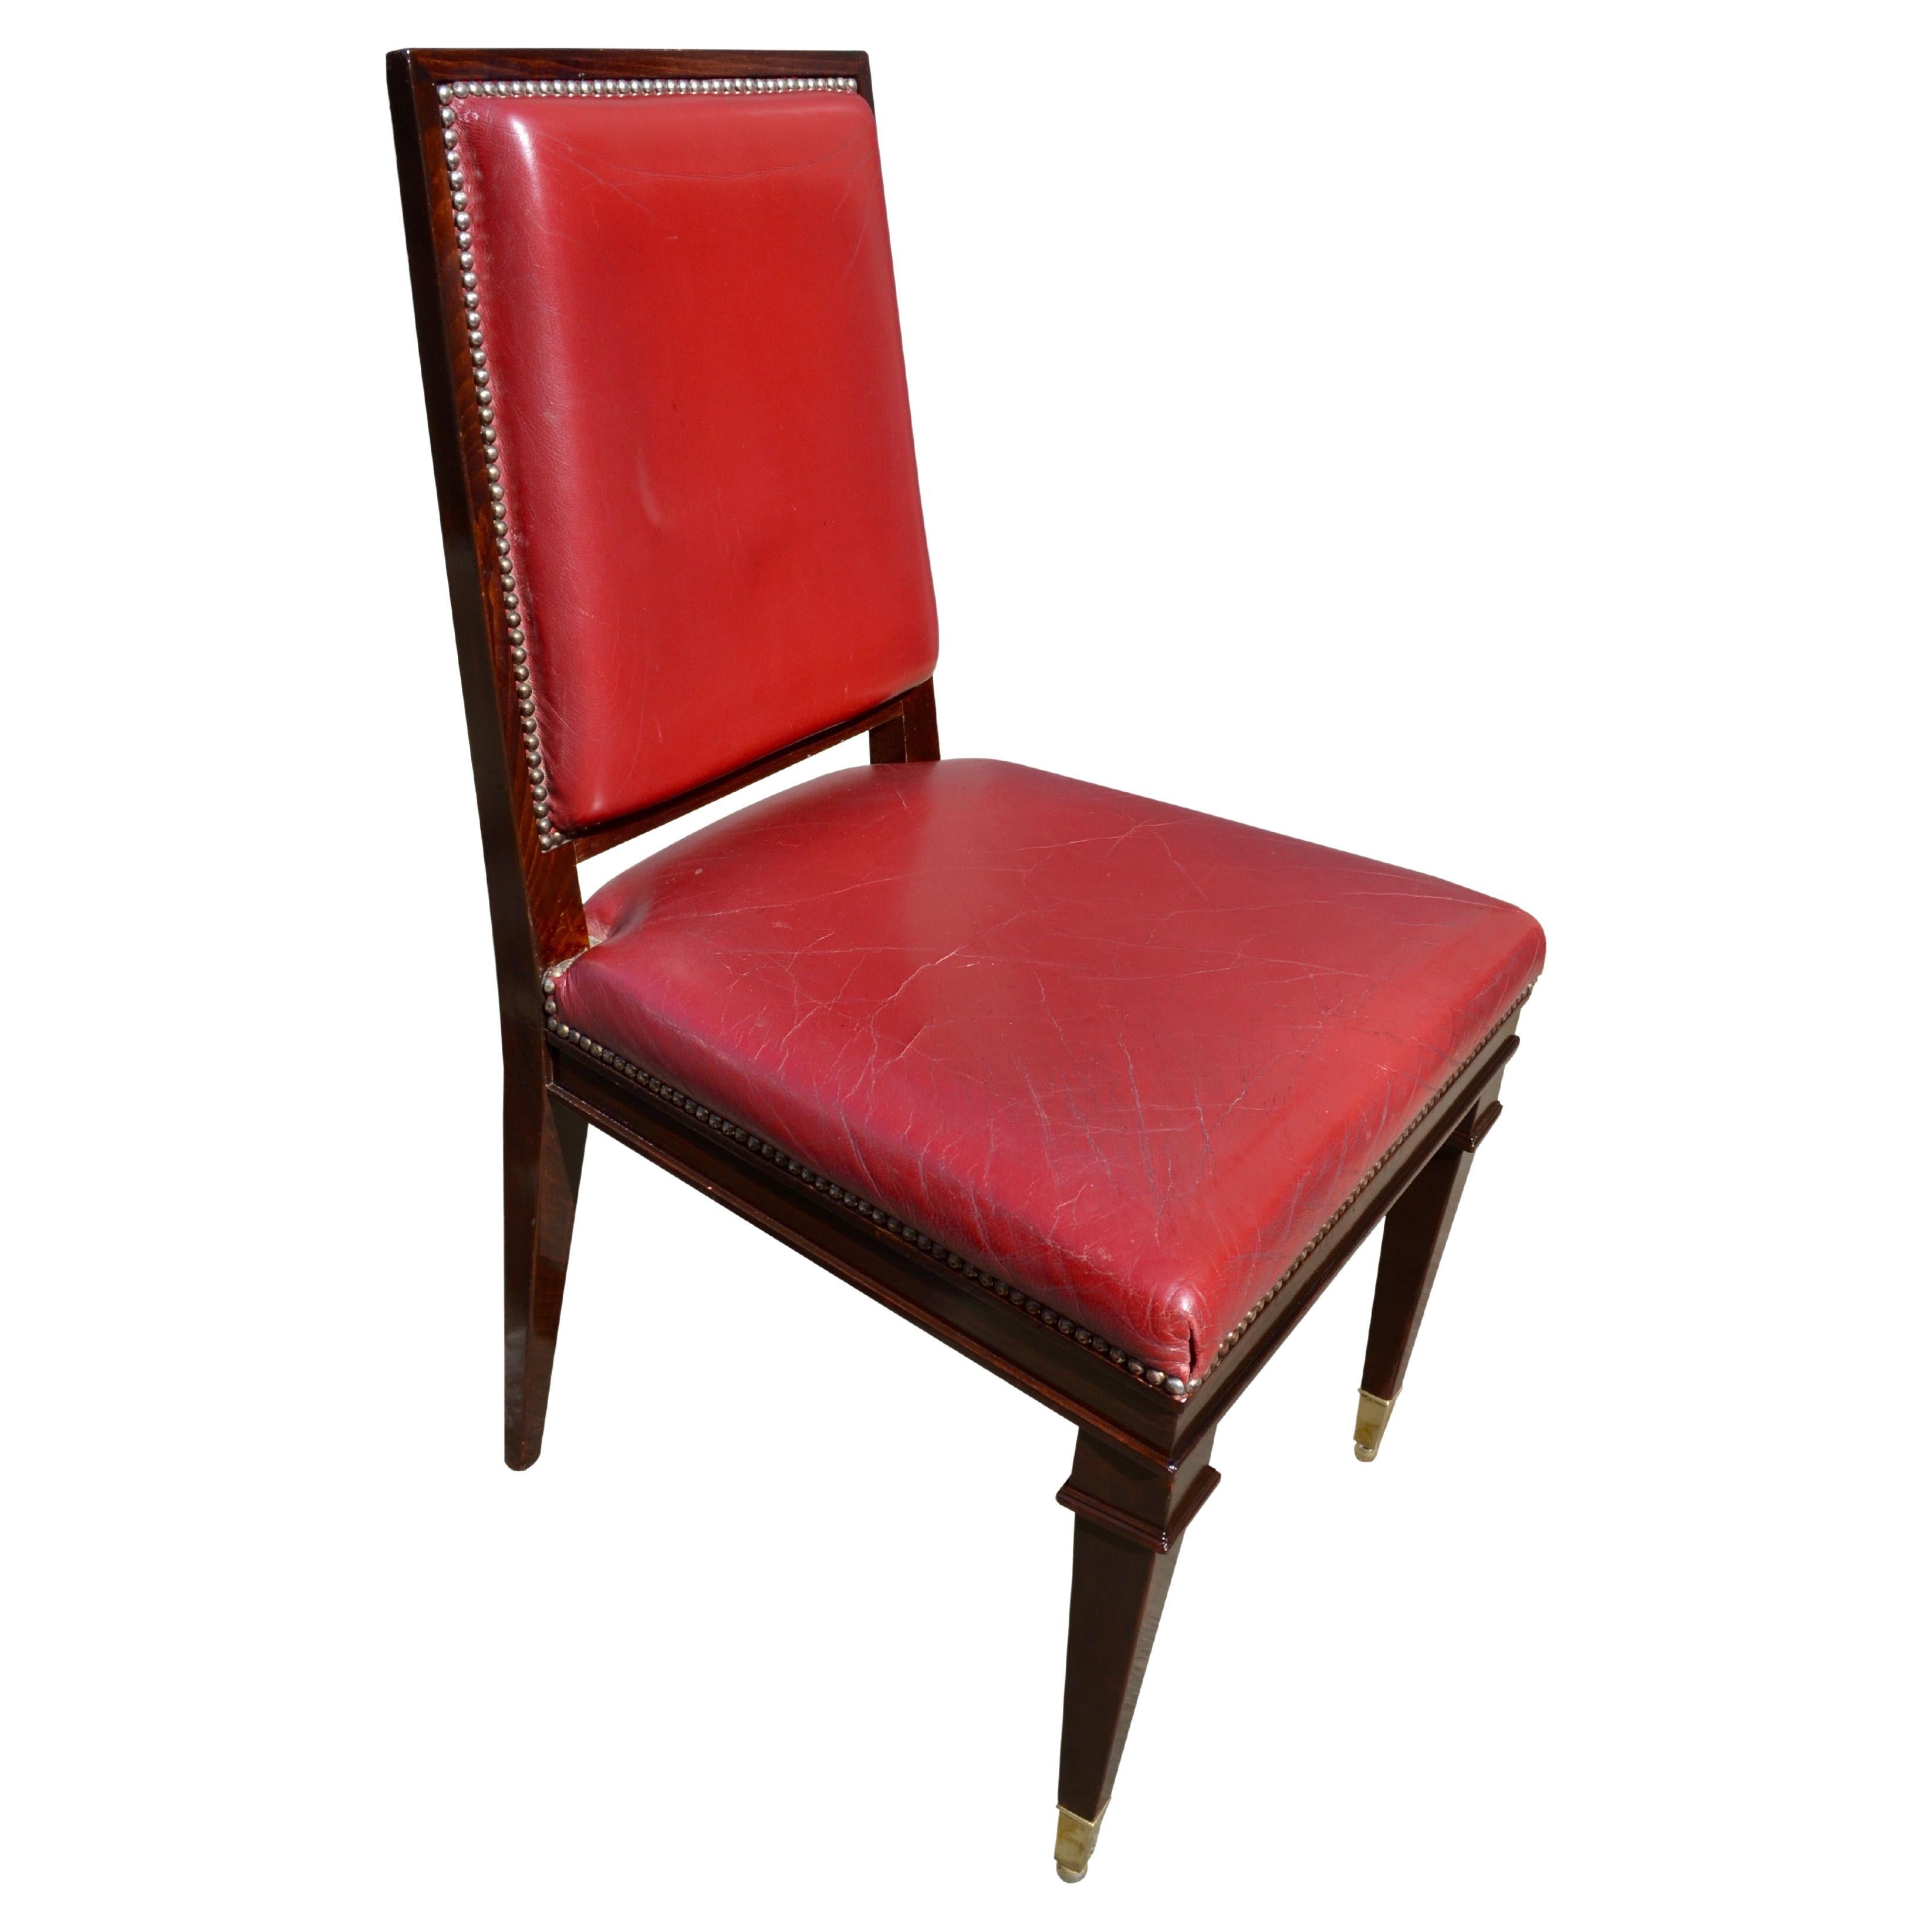 The frames of these Classic Art Deco dining chairs are of stained beech to resemble palisander or macassar ebony. The rectangular shaped seats and backs are upholstered in red leather with brass nailing all of which are in very good condition; the